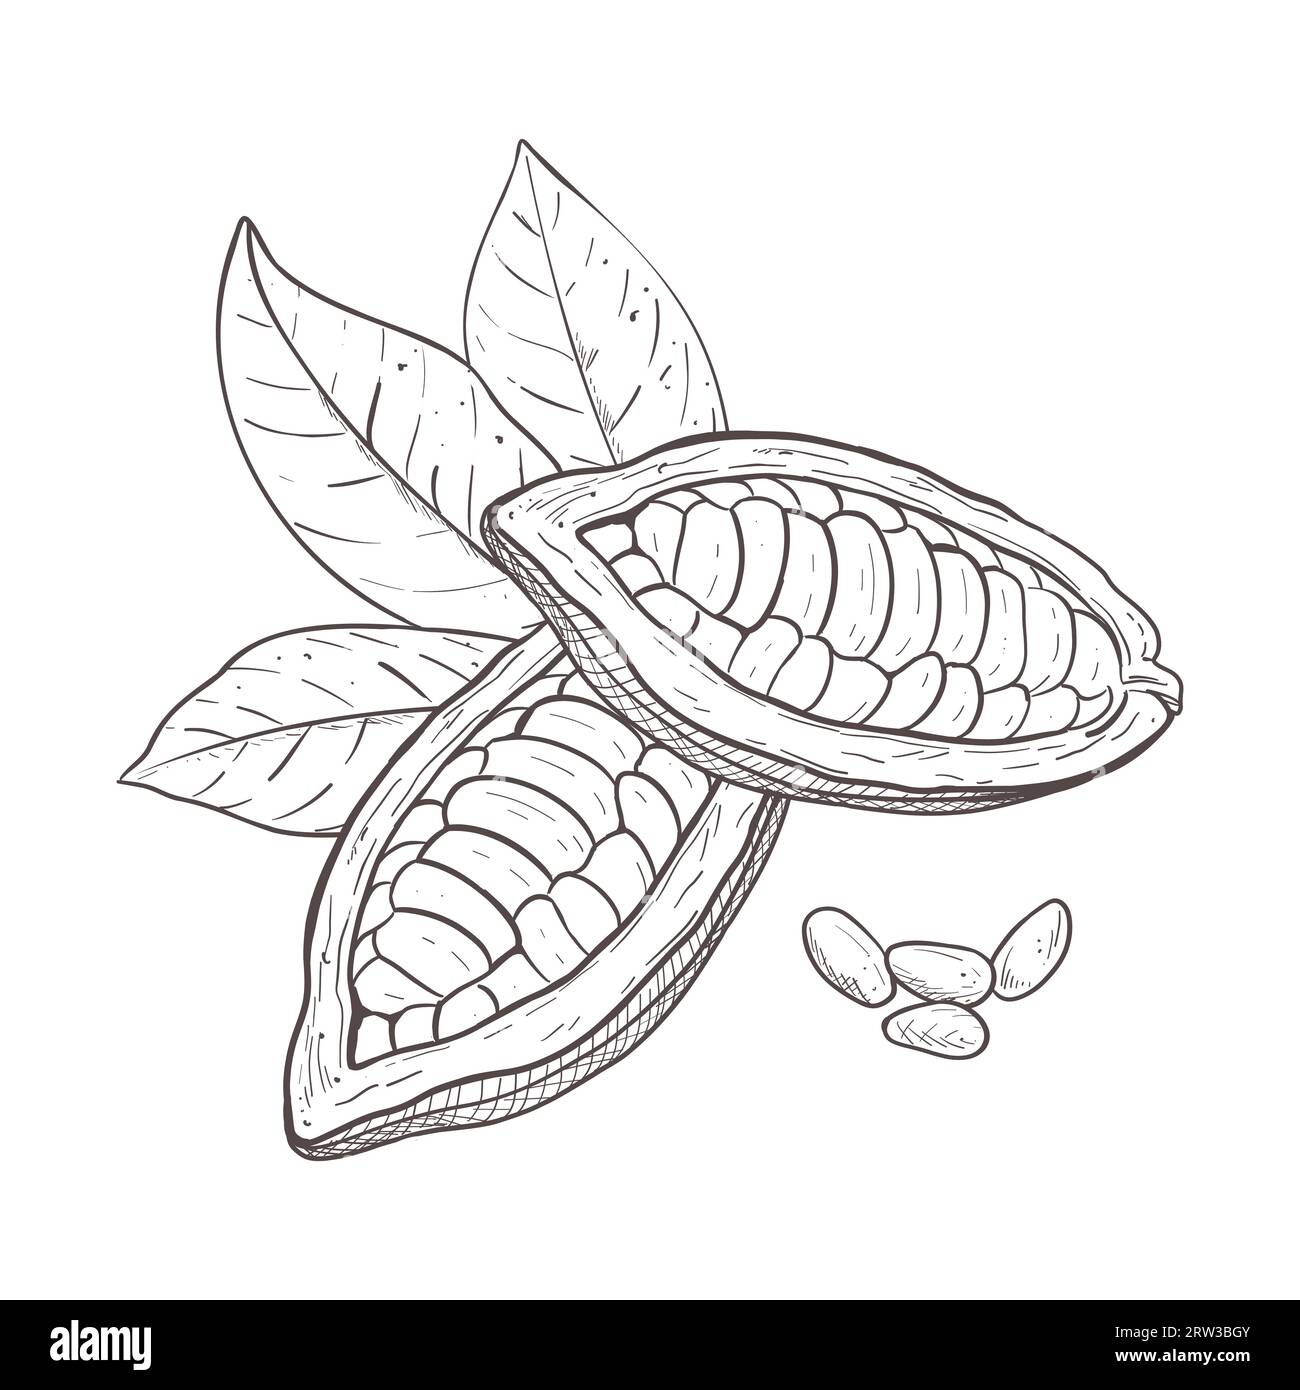 Vector illustration set of cocoa leaves, unpeeled beans and seeds. Black outline of branch, graphic drawing. For postcards, design and composition Stock Vector